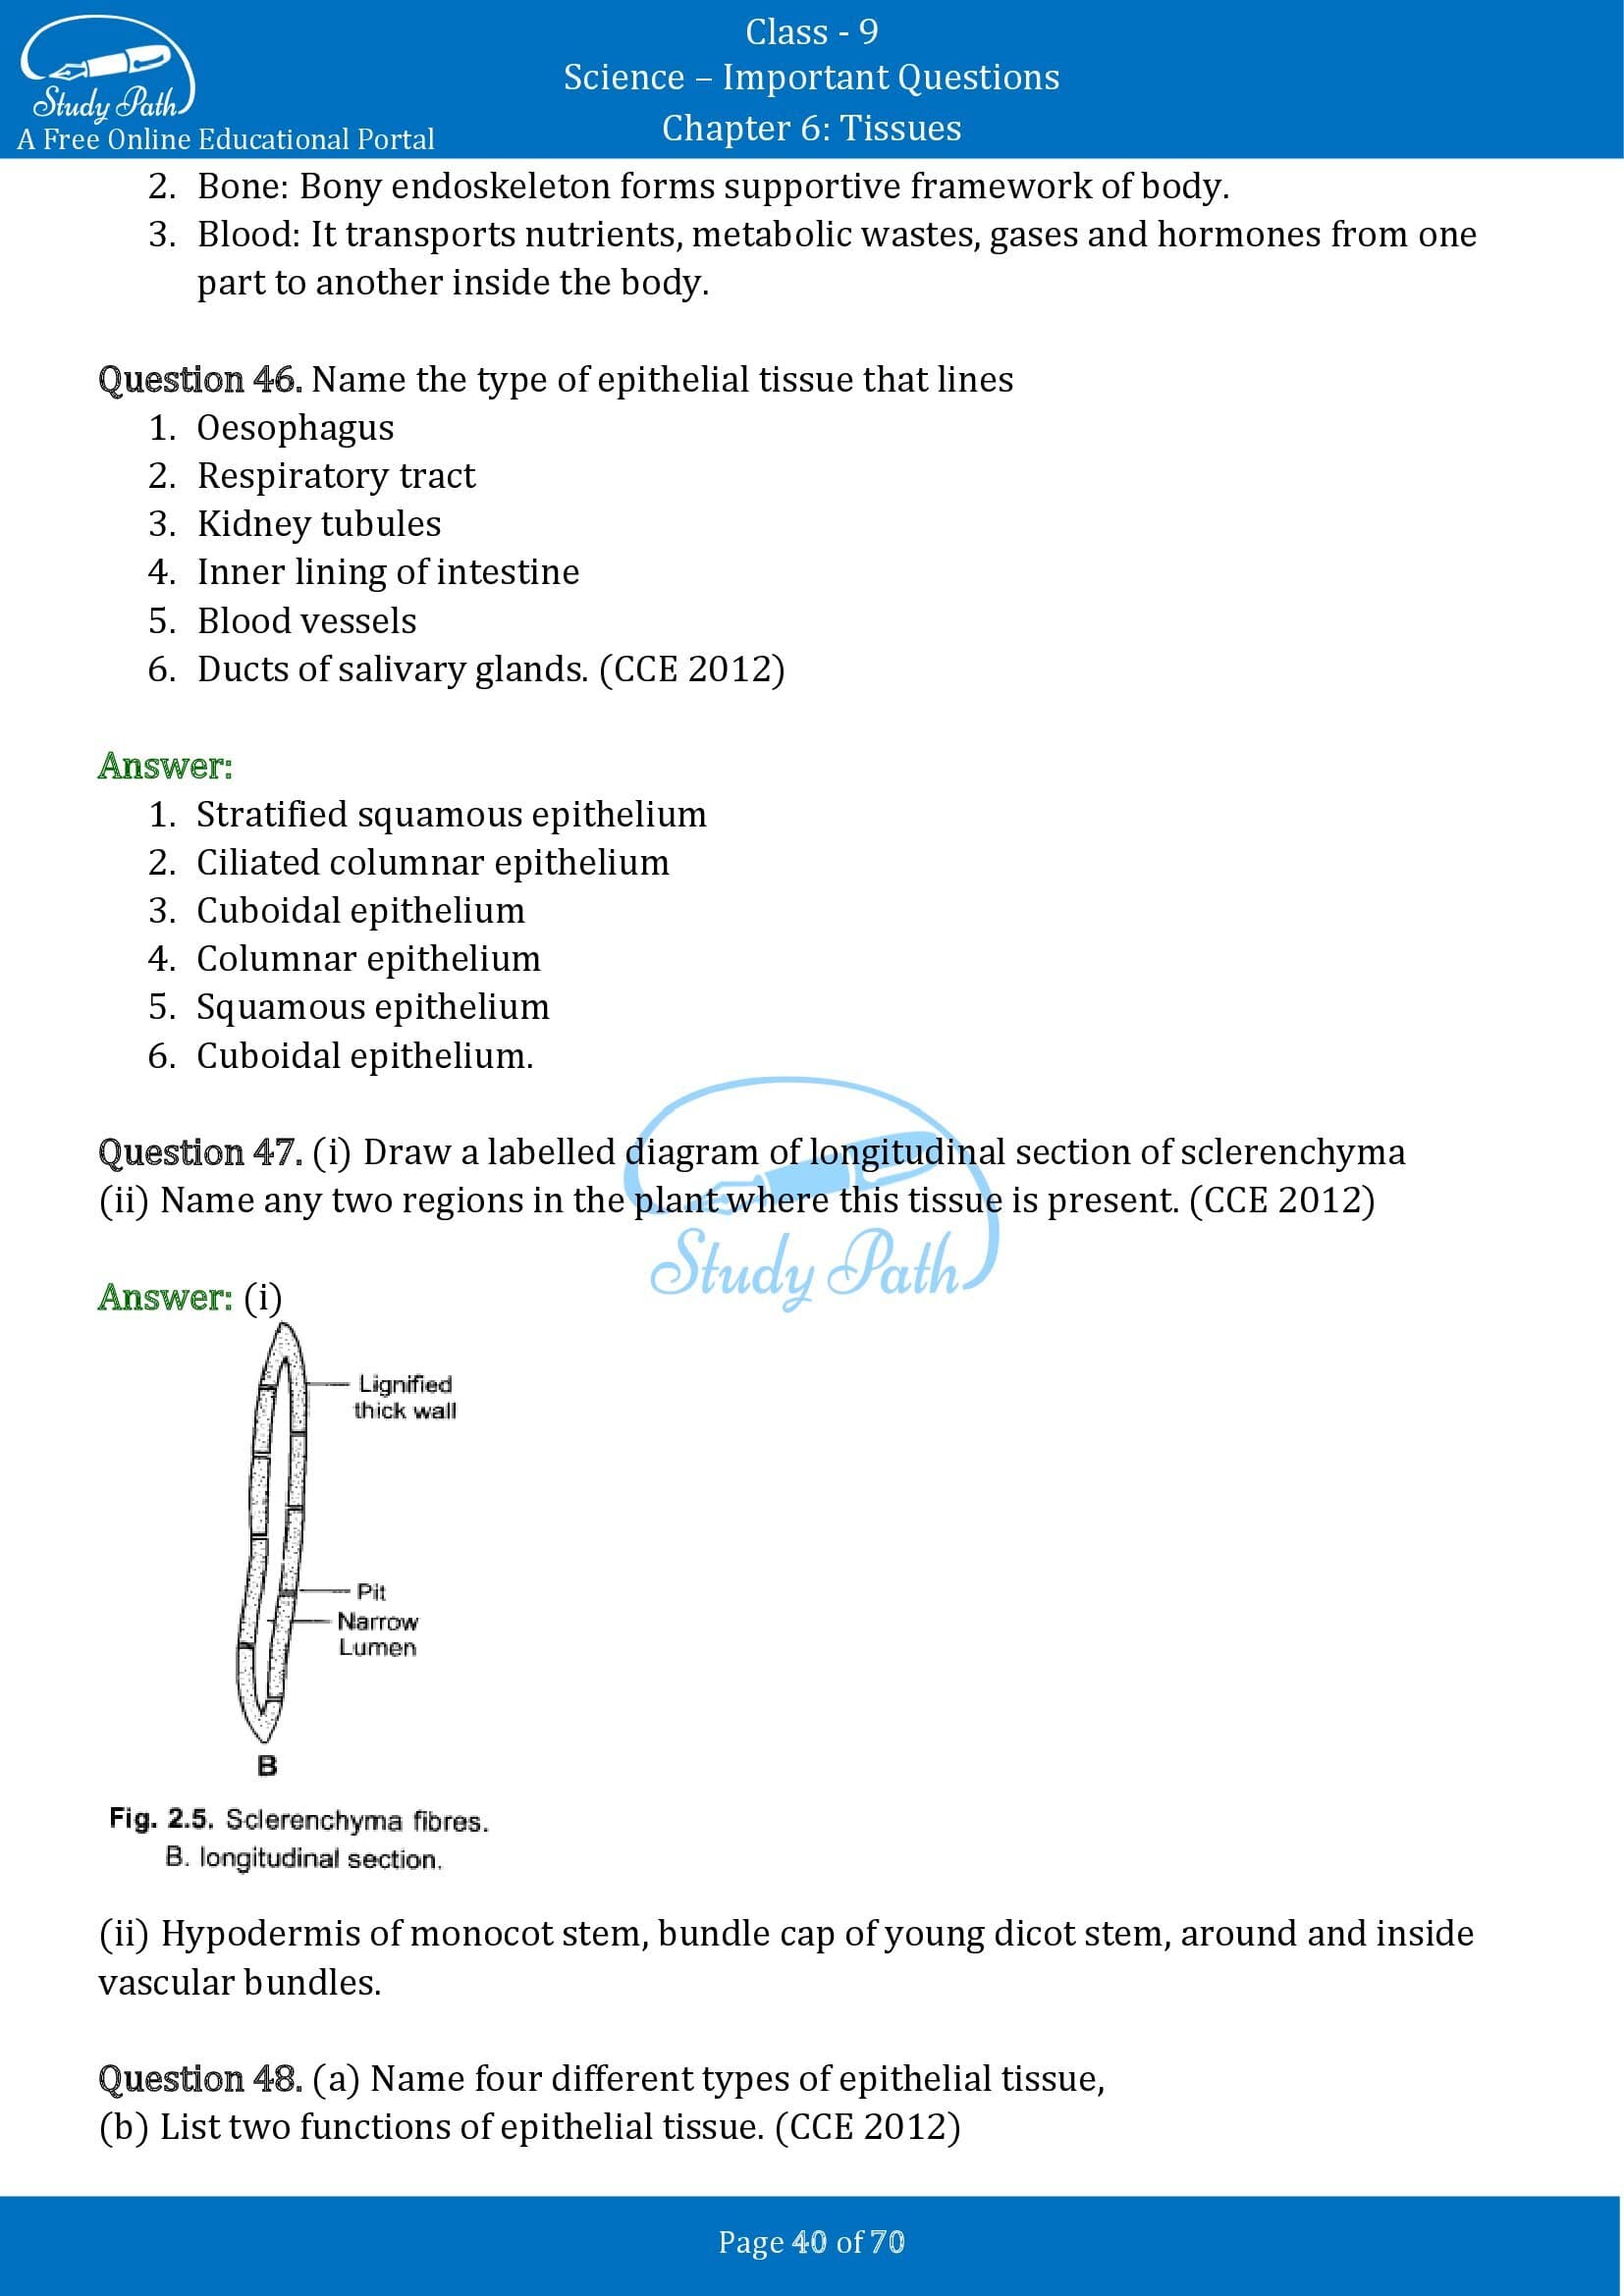 Important Questions for Class 9 Science Chapter 6 Tissues 00040